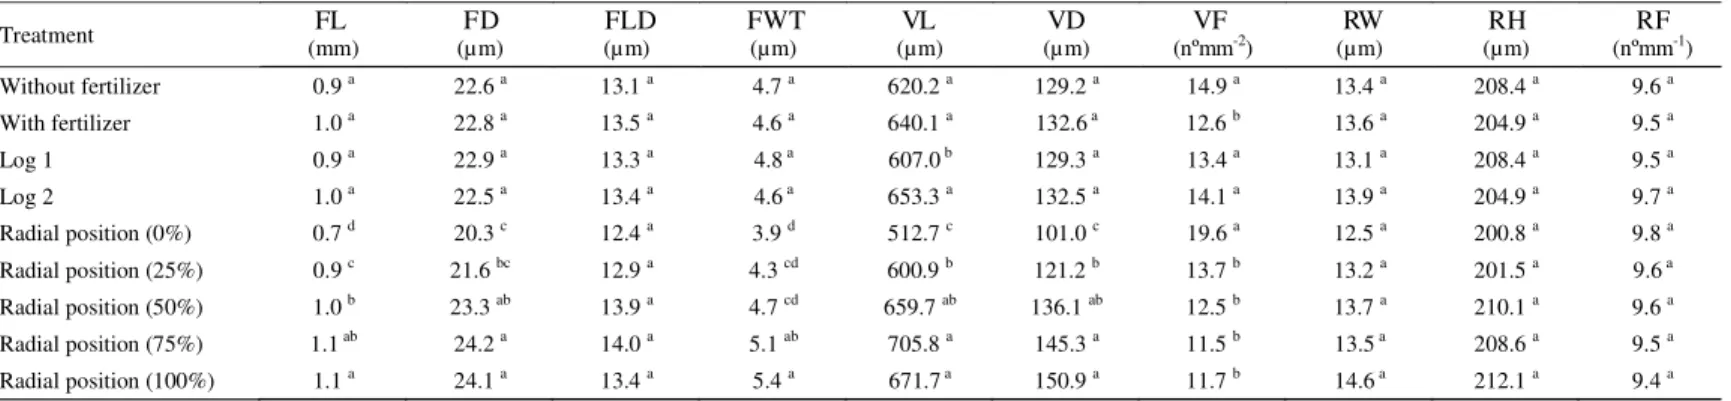 Table 2 – Means of anatomical characteristics: fiber length (FL), fiber diameter (FD), fiber lumen (FLD), fiber wall thickness (FWT), vessel elements length (VL), vessel diameter (VD), vessel frequency (VF), ray width (RW), ray height (RH) and ray frequenc